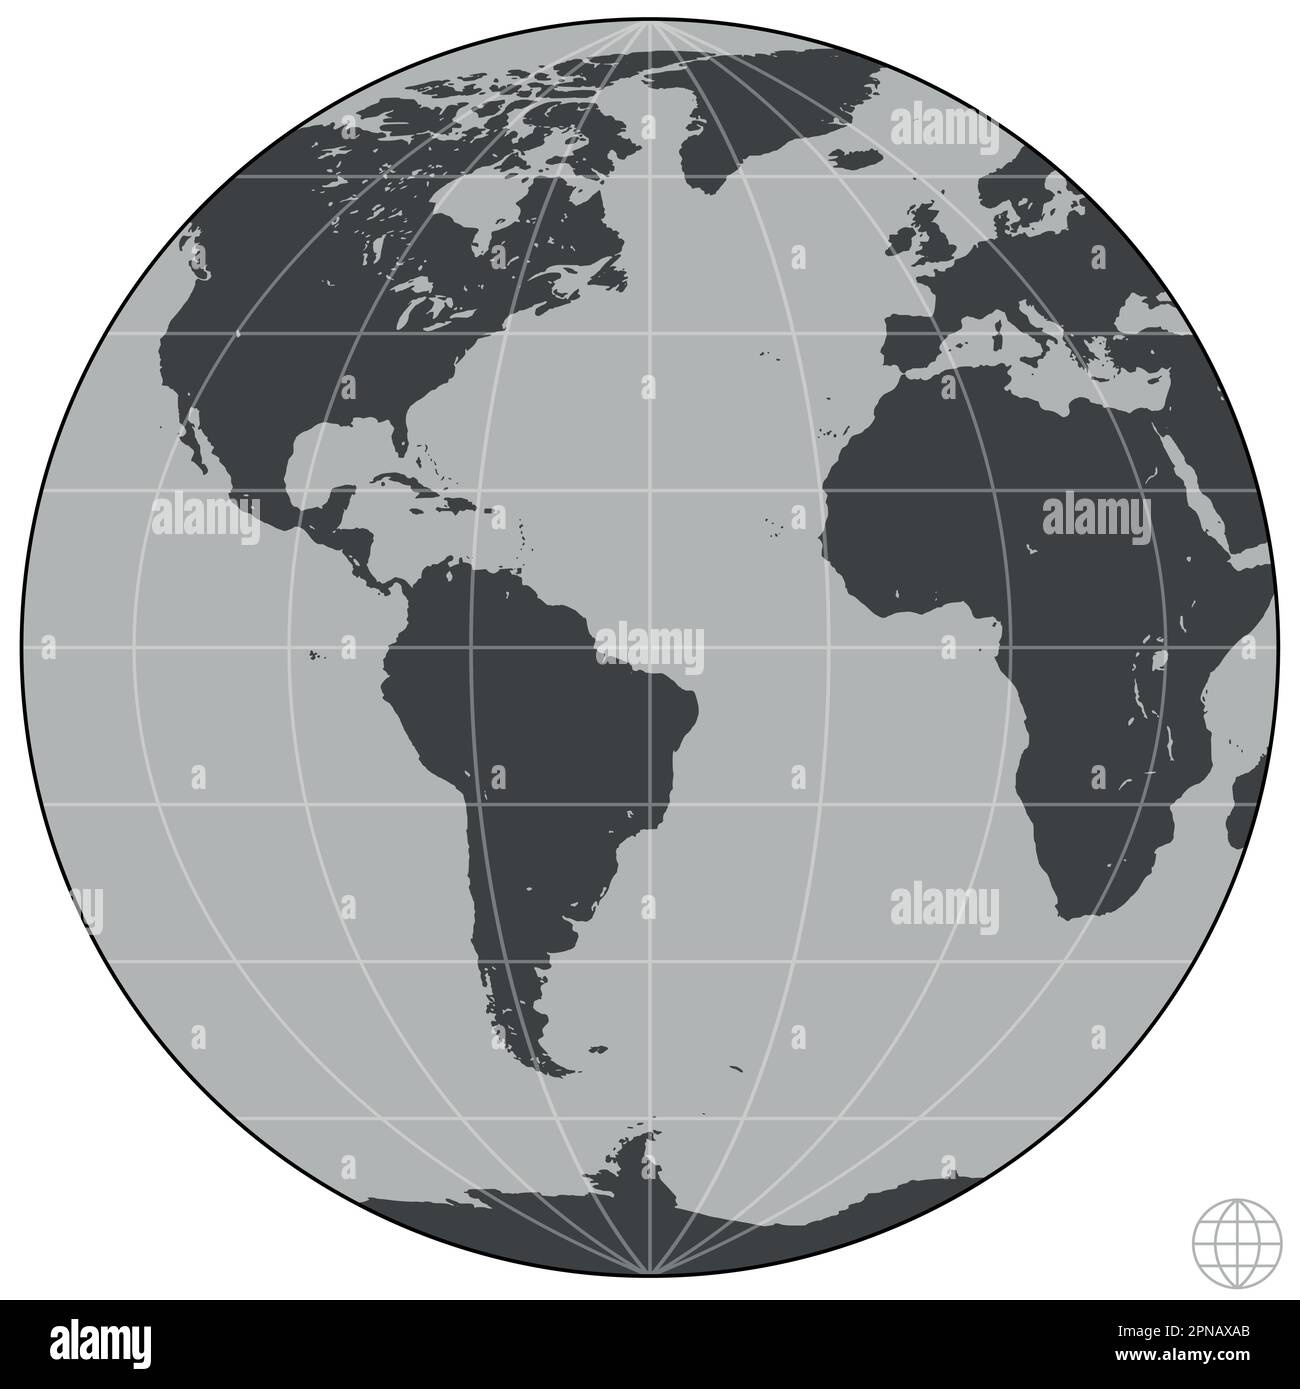 Vector design of the planet earth, design of the terrestrial sphere Stock Vector